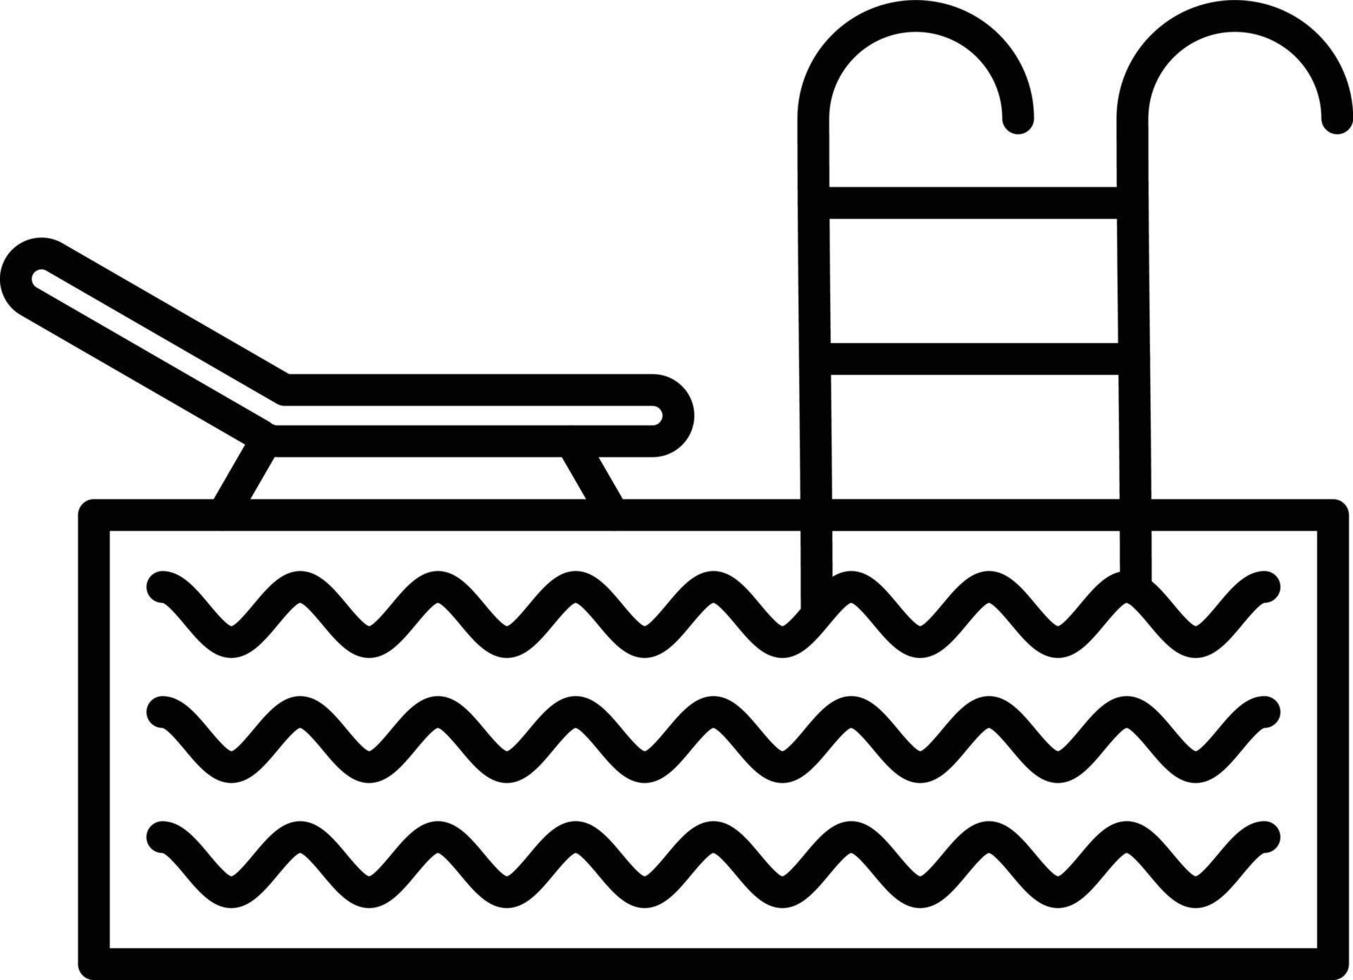 Swimming Pool Outline Icon vector